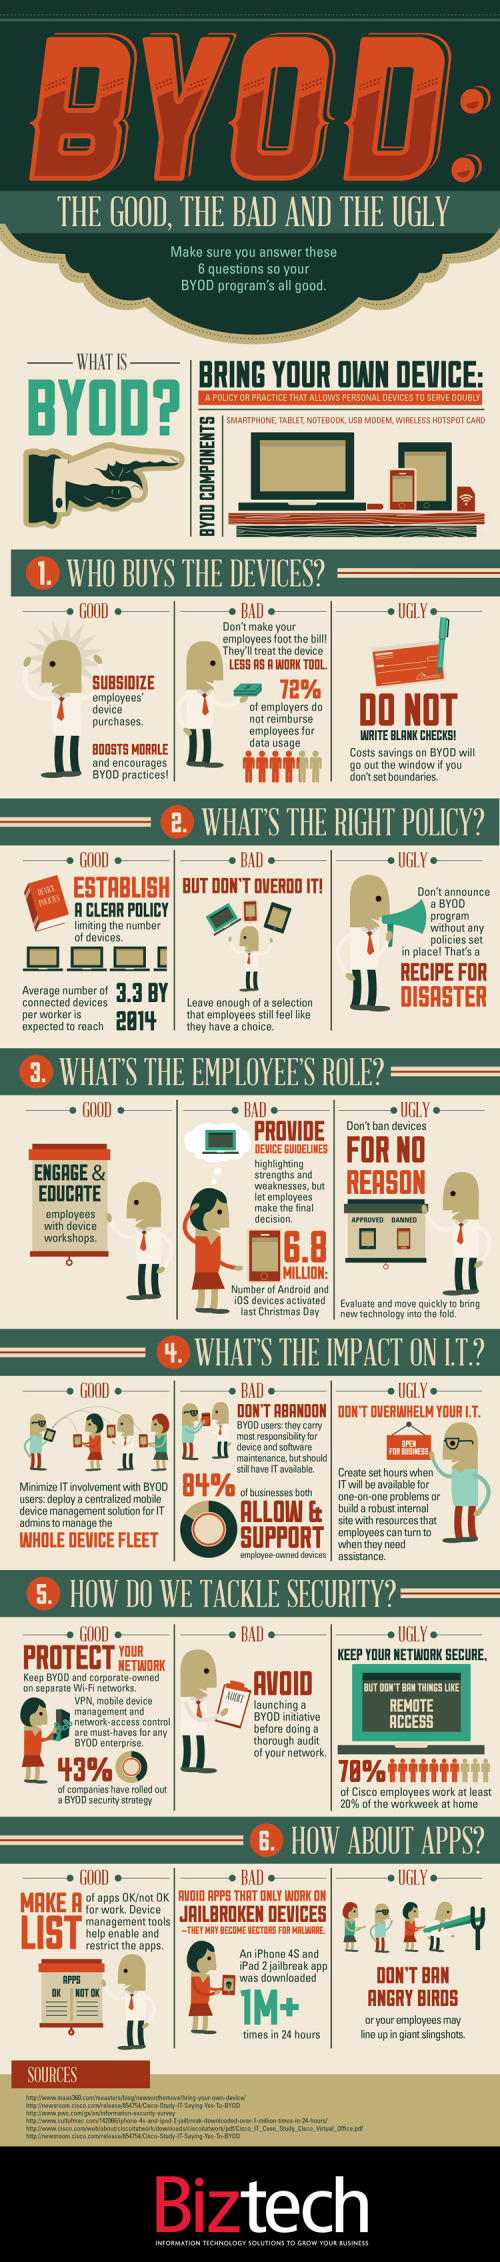 BYOD: The Good the Bad the Ugly infographic